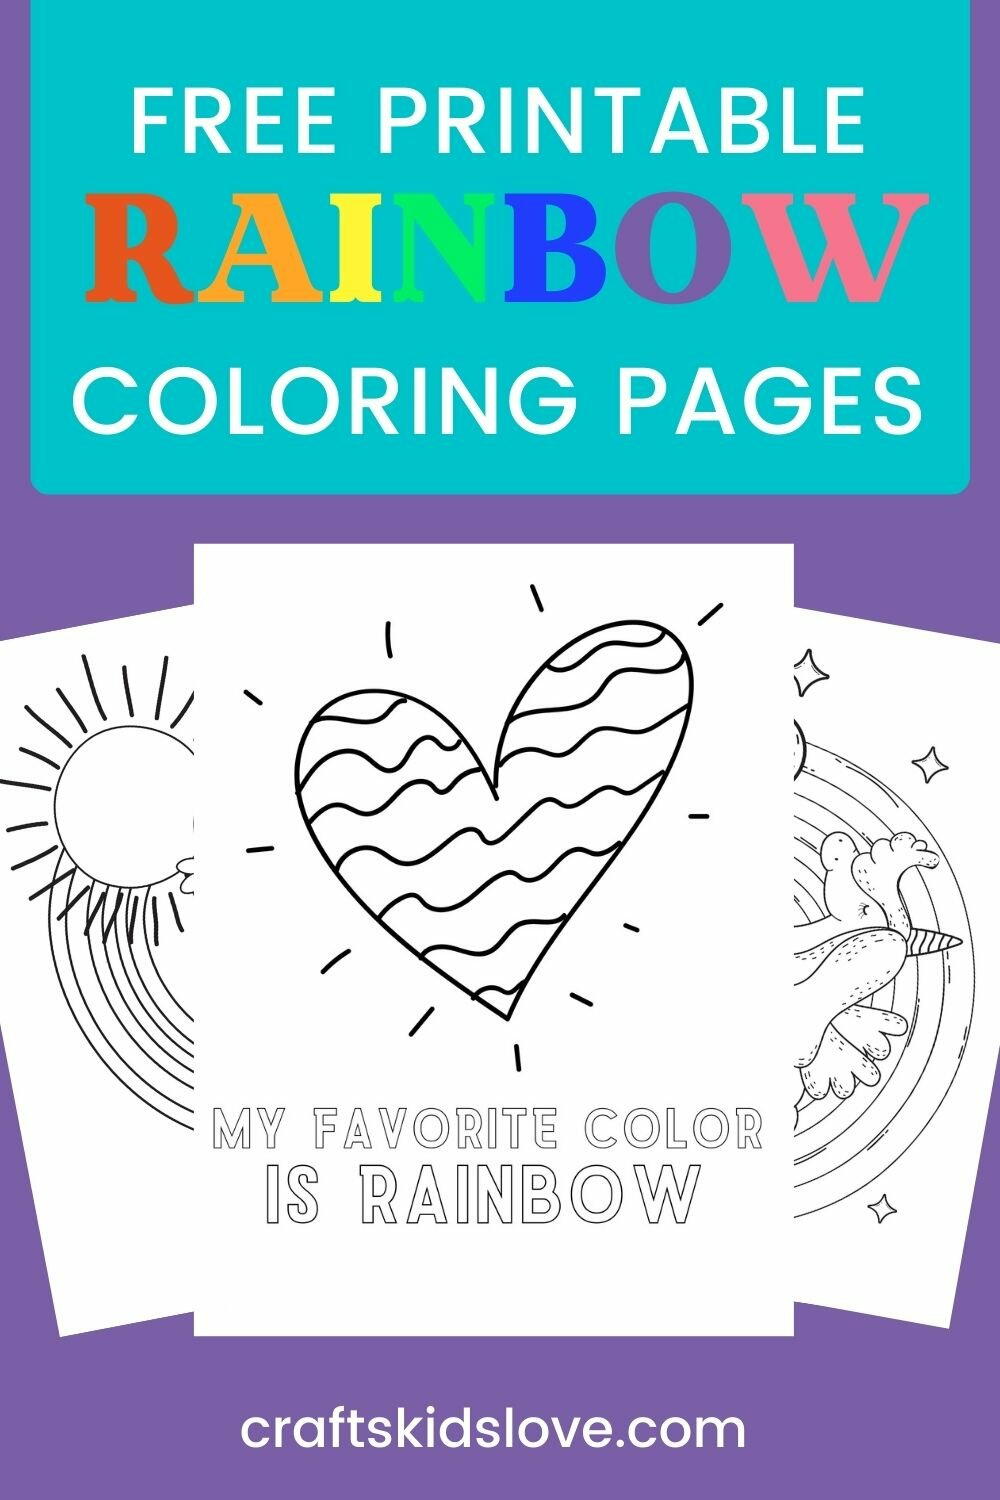 Free Printable Rainbow Coloring Pages | AllFreeKidsCrafts.com